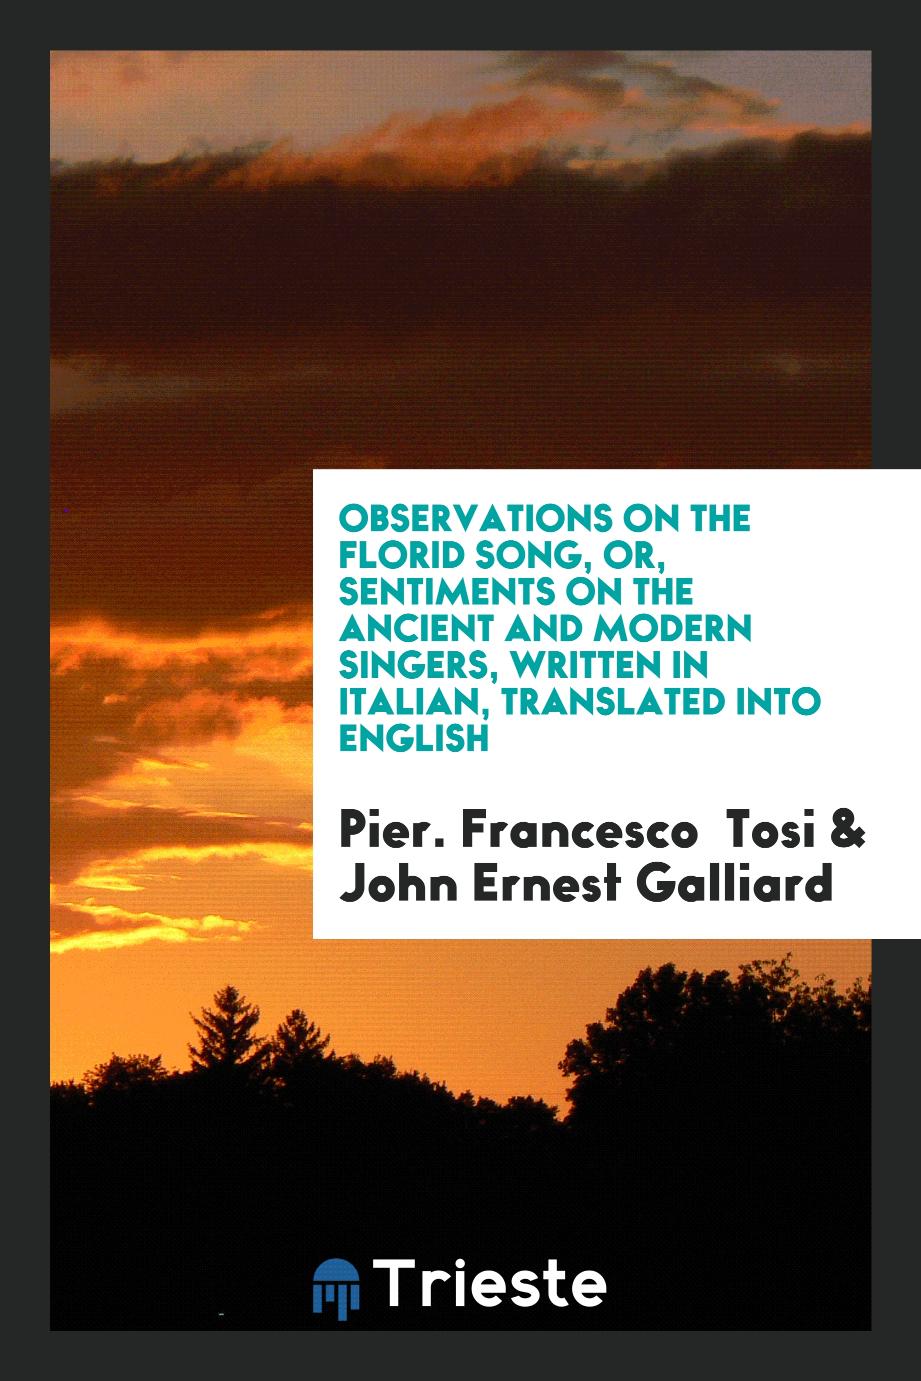 Observations on the Florid Song, or, Sentiments on the Ancient and Modern Singers, Written in Italian, Translated into English